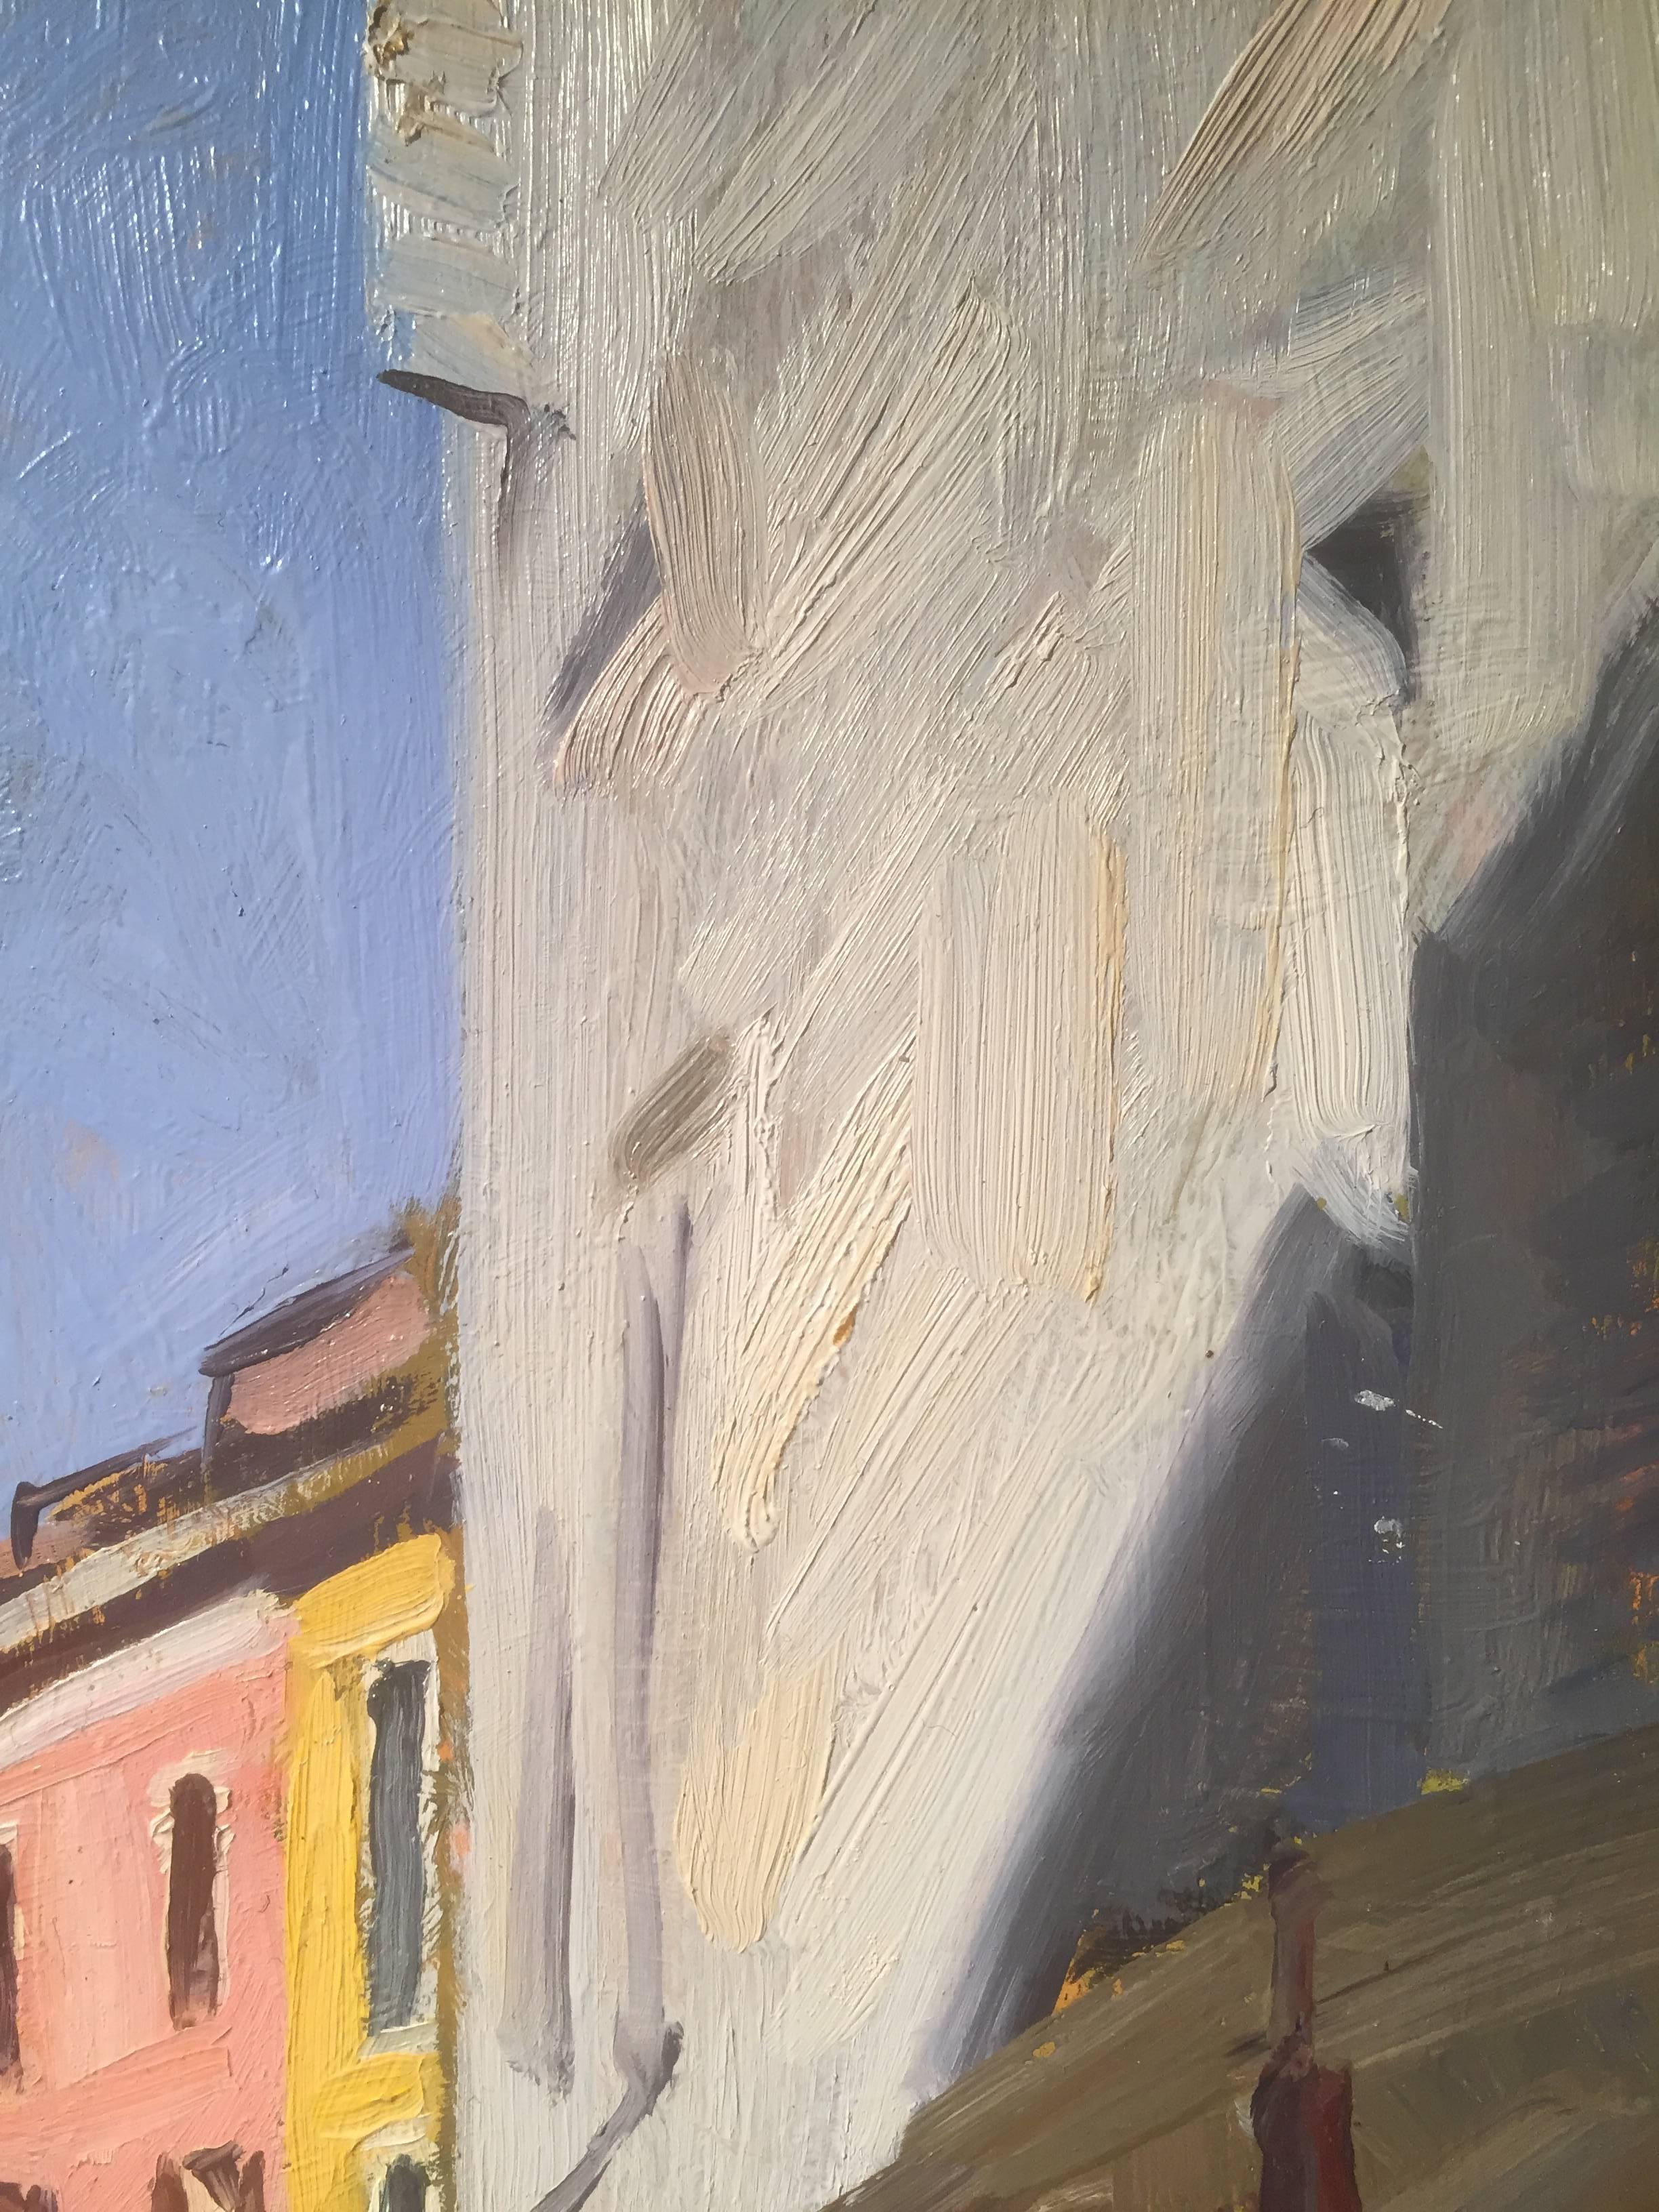 An oil painting of an Italian street scene by renowned american plein air painter, MArc Dalessio. Painted en plein air in Varese, Italy, an alleyway between buildings. A pink building stands centrally at the end of the alley. Shadows cascade across